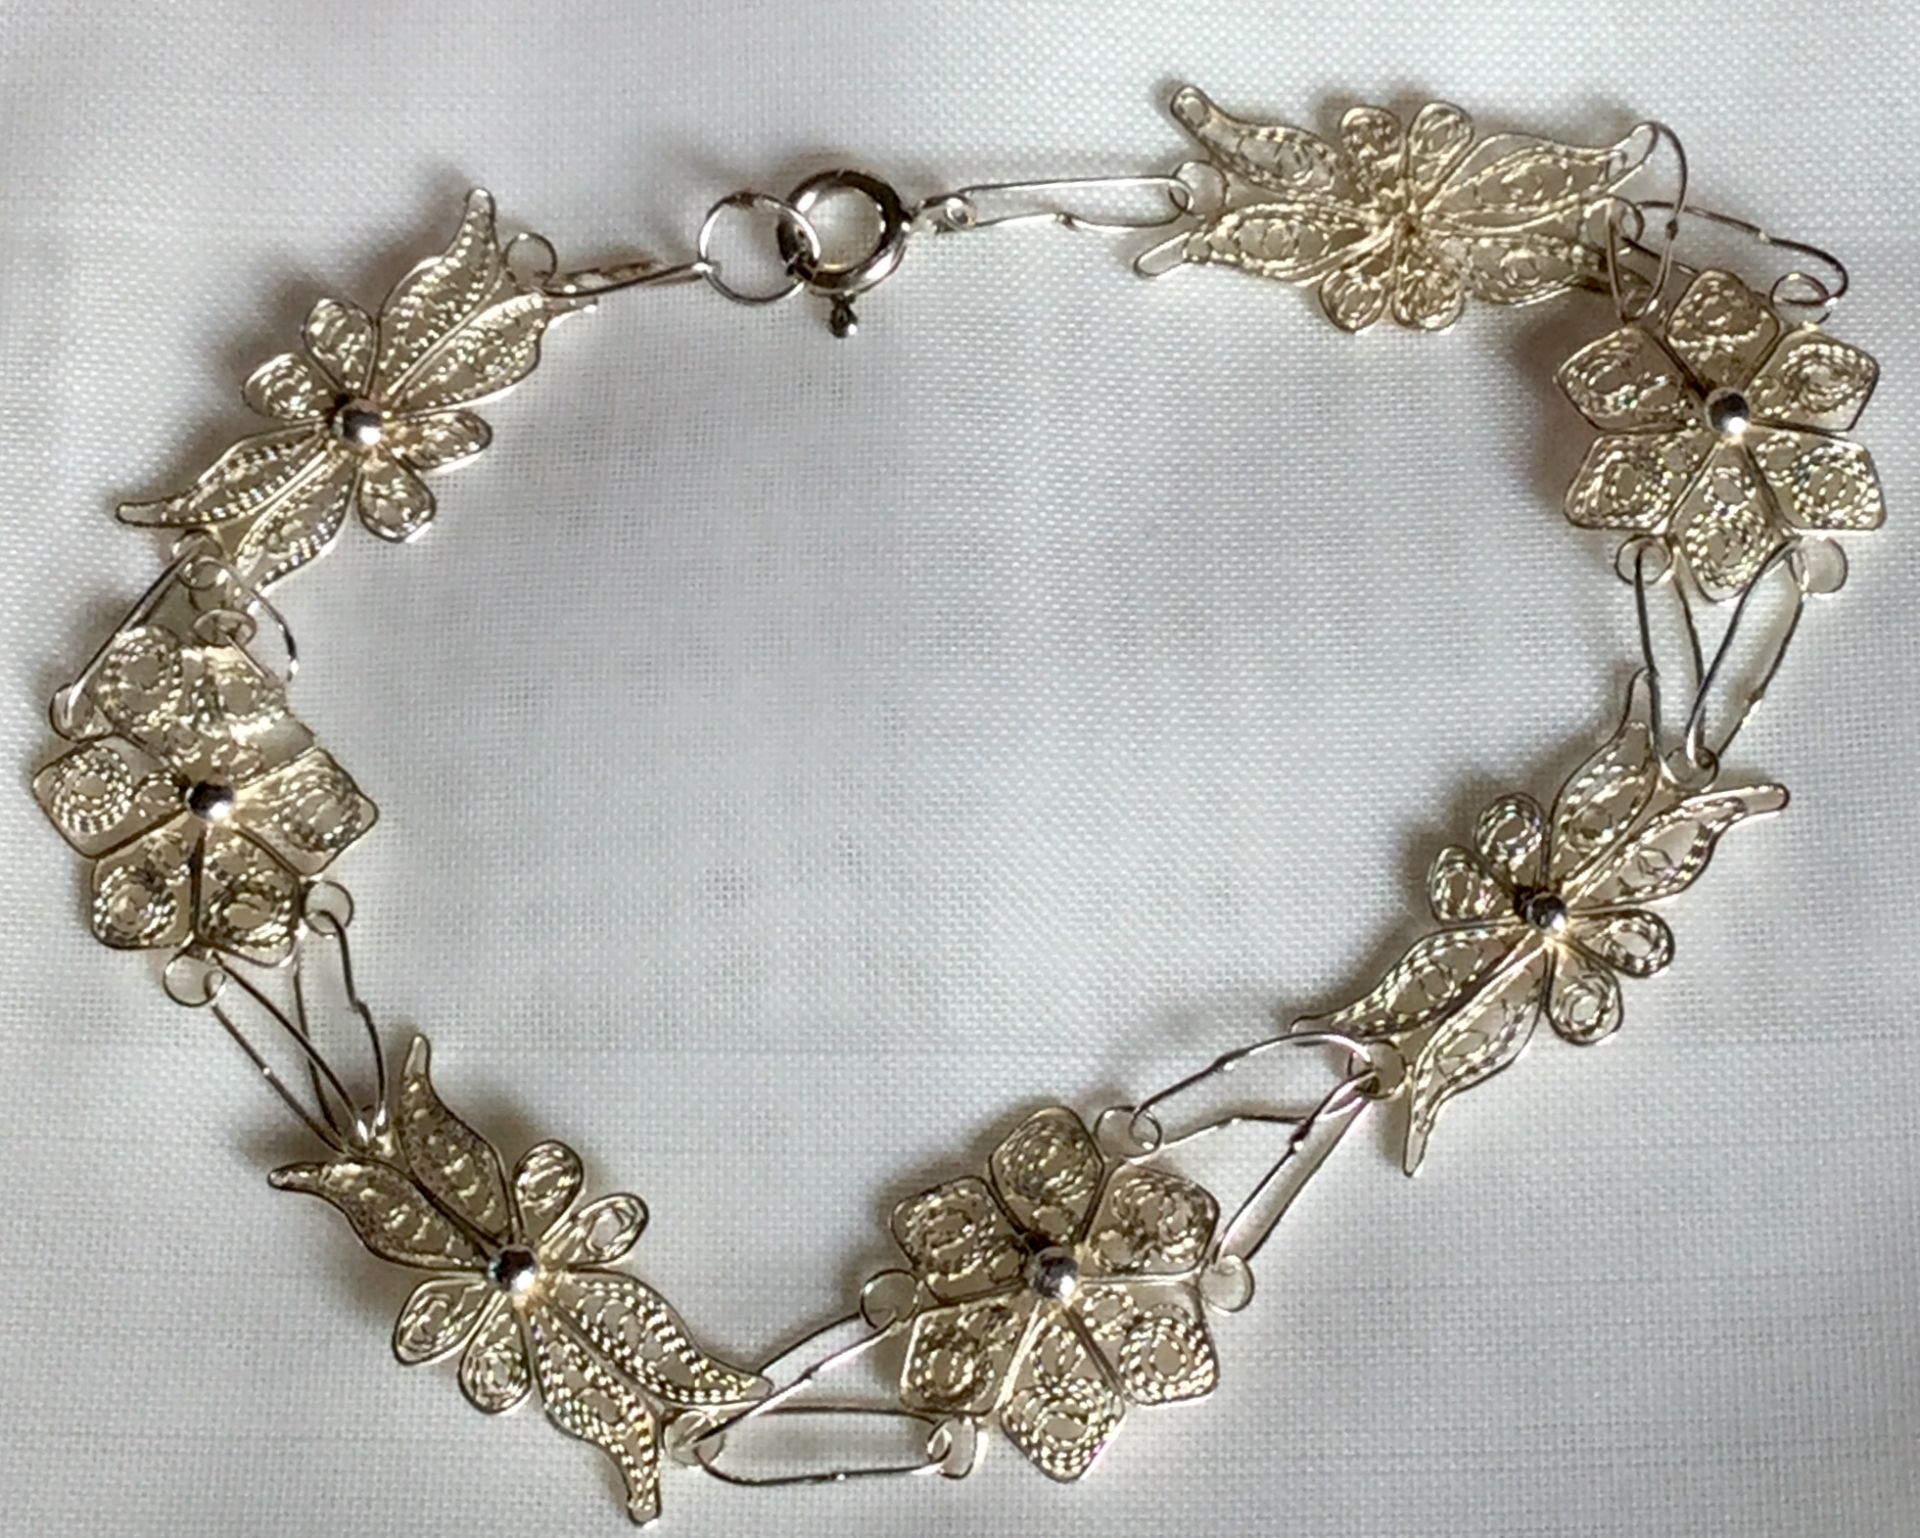 Pretty Intricate Silver bracelet from Malta flower intricate design - Image 2 of 5